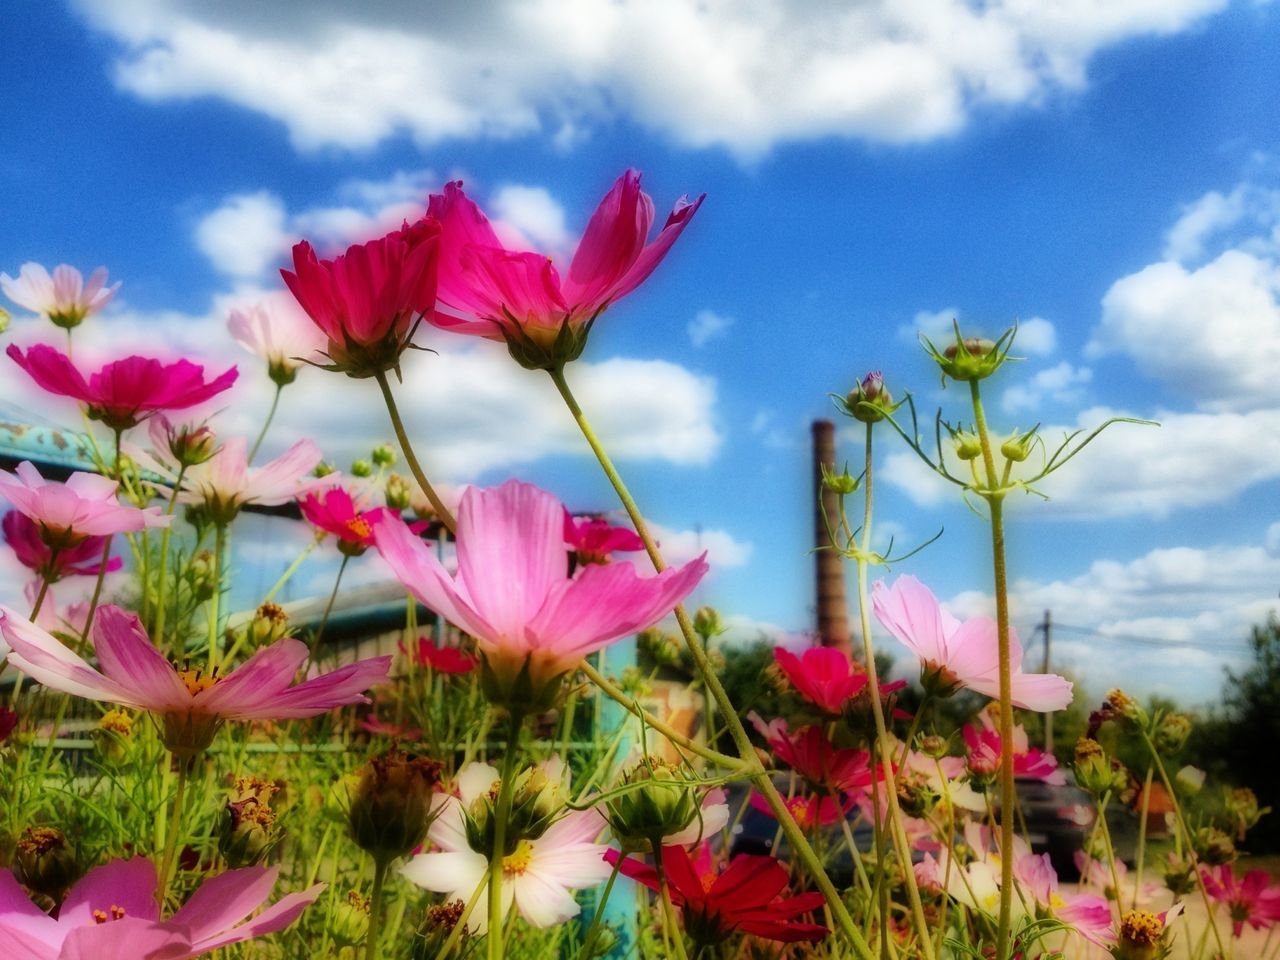 flower, freshness, fragility, sky, growth, pink color, petal, beauty in nature, cloud - sky, blooming, nature, plant, flower head, cloud, stem, field, blossom, in bloom, cloudy, pink